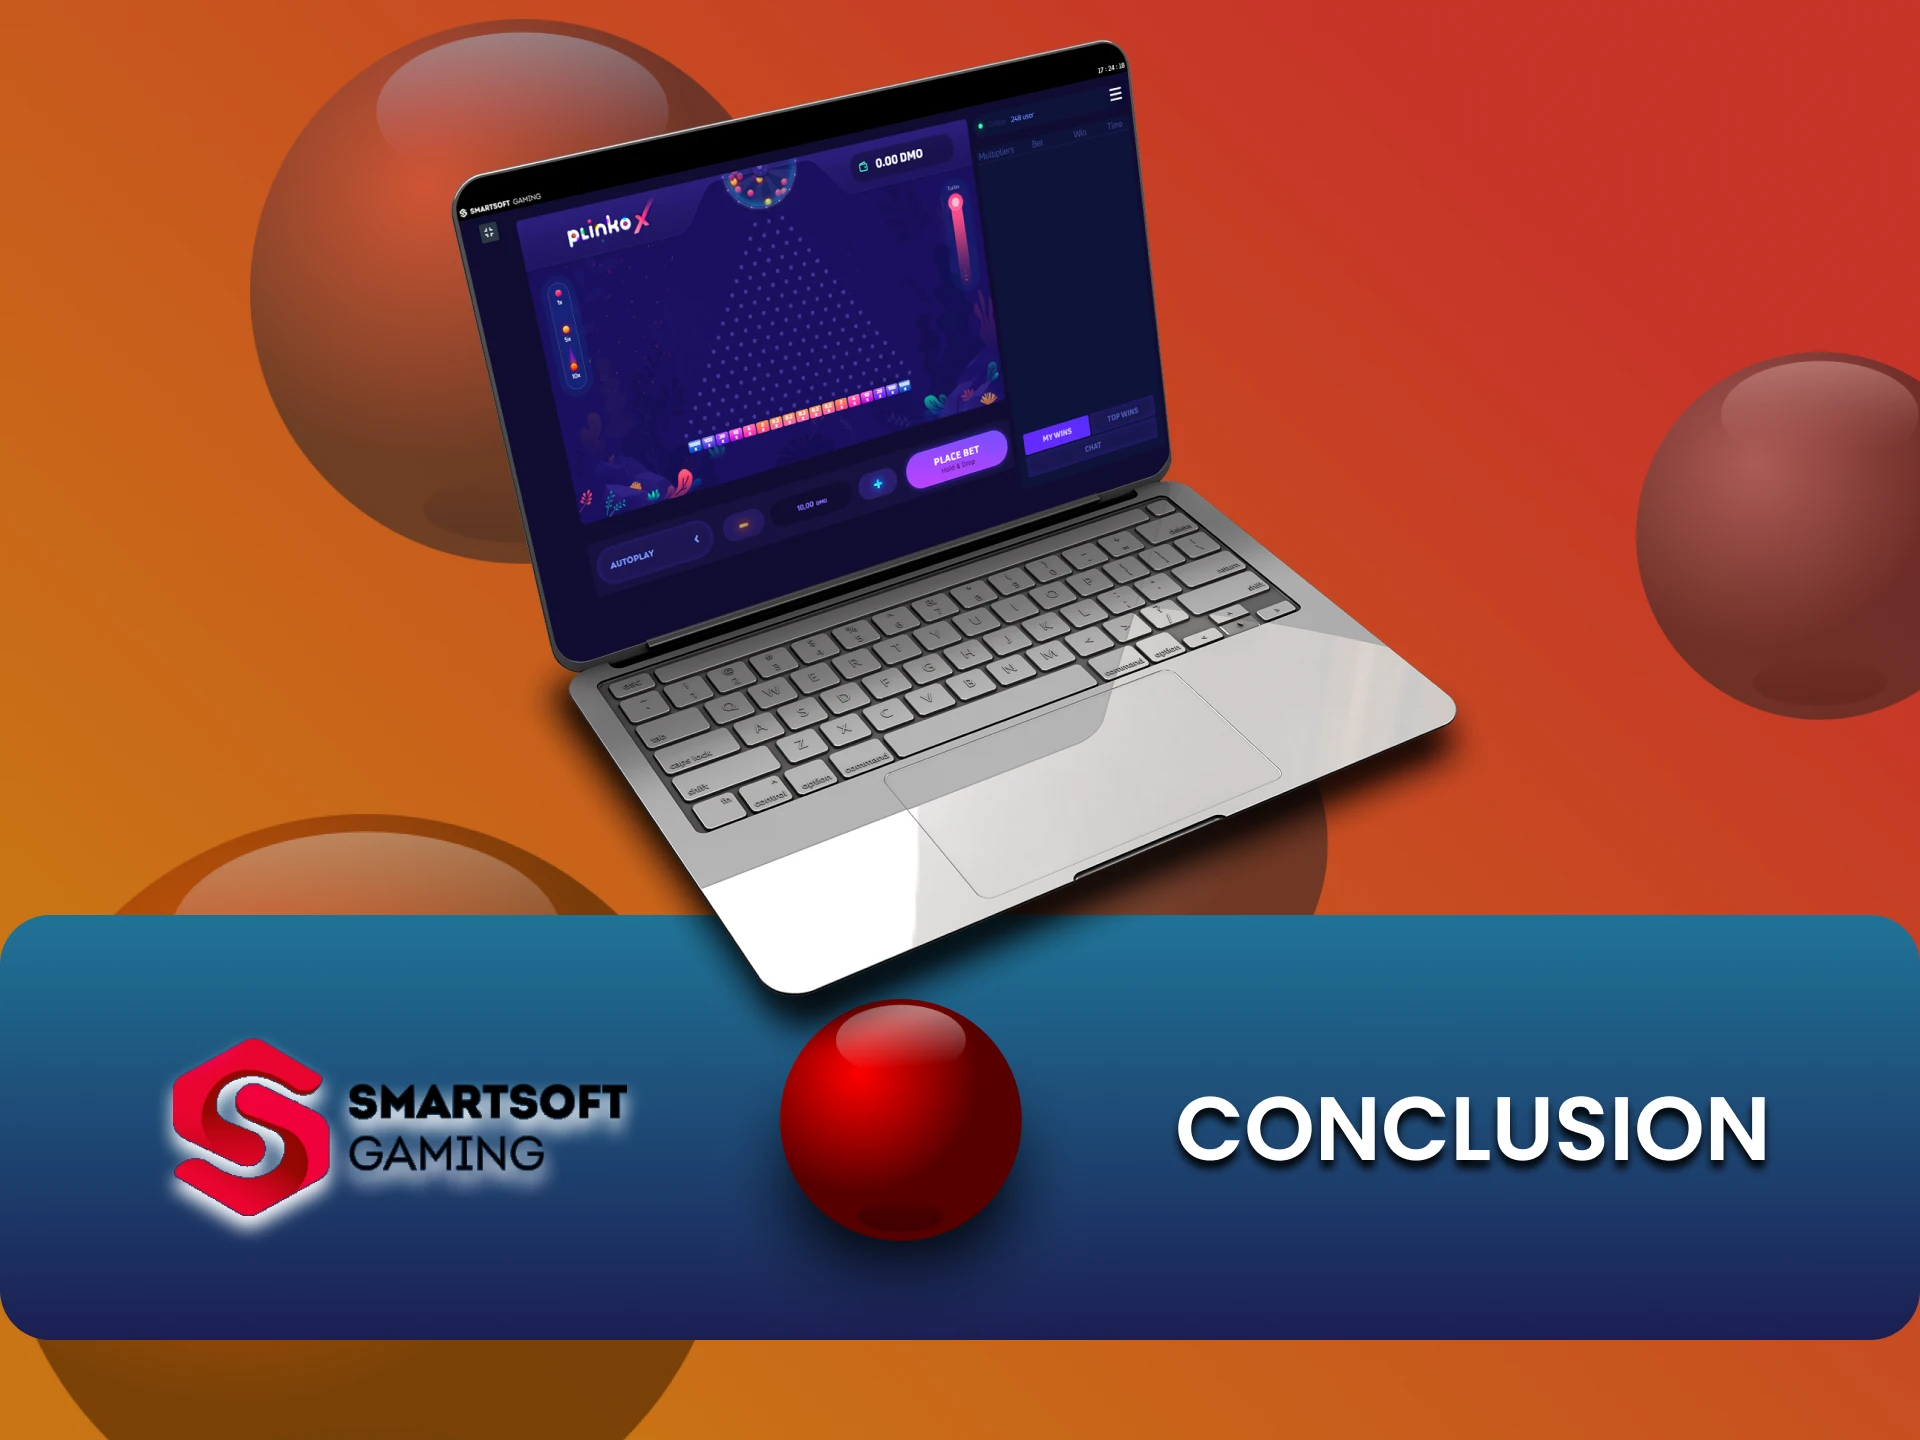 Smartsoft will always surprise users with the quality of its games.